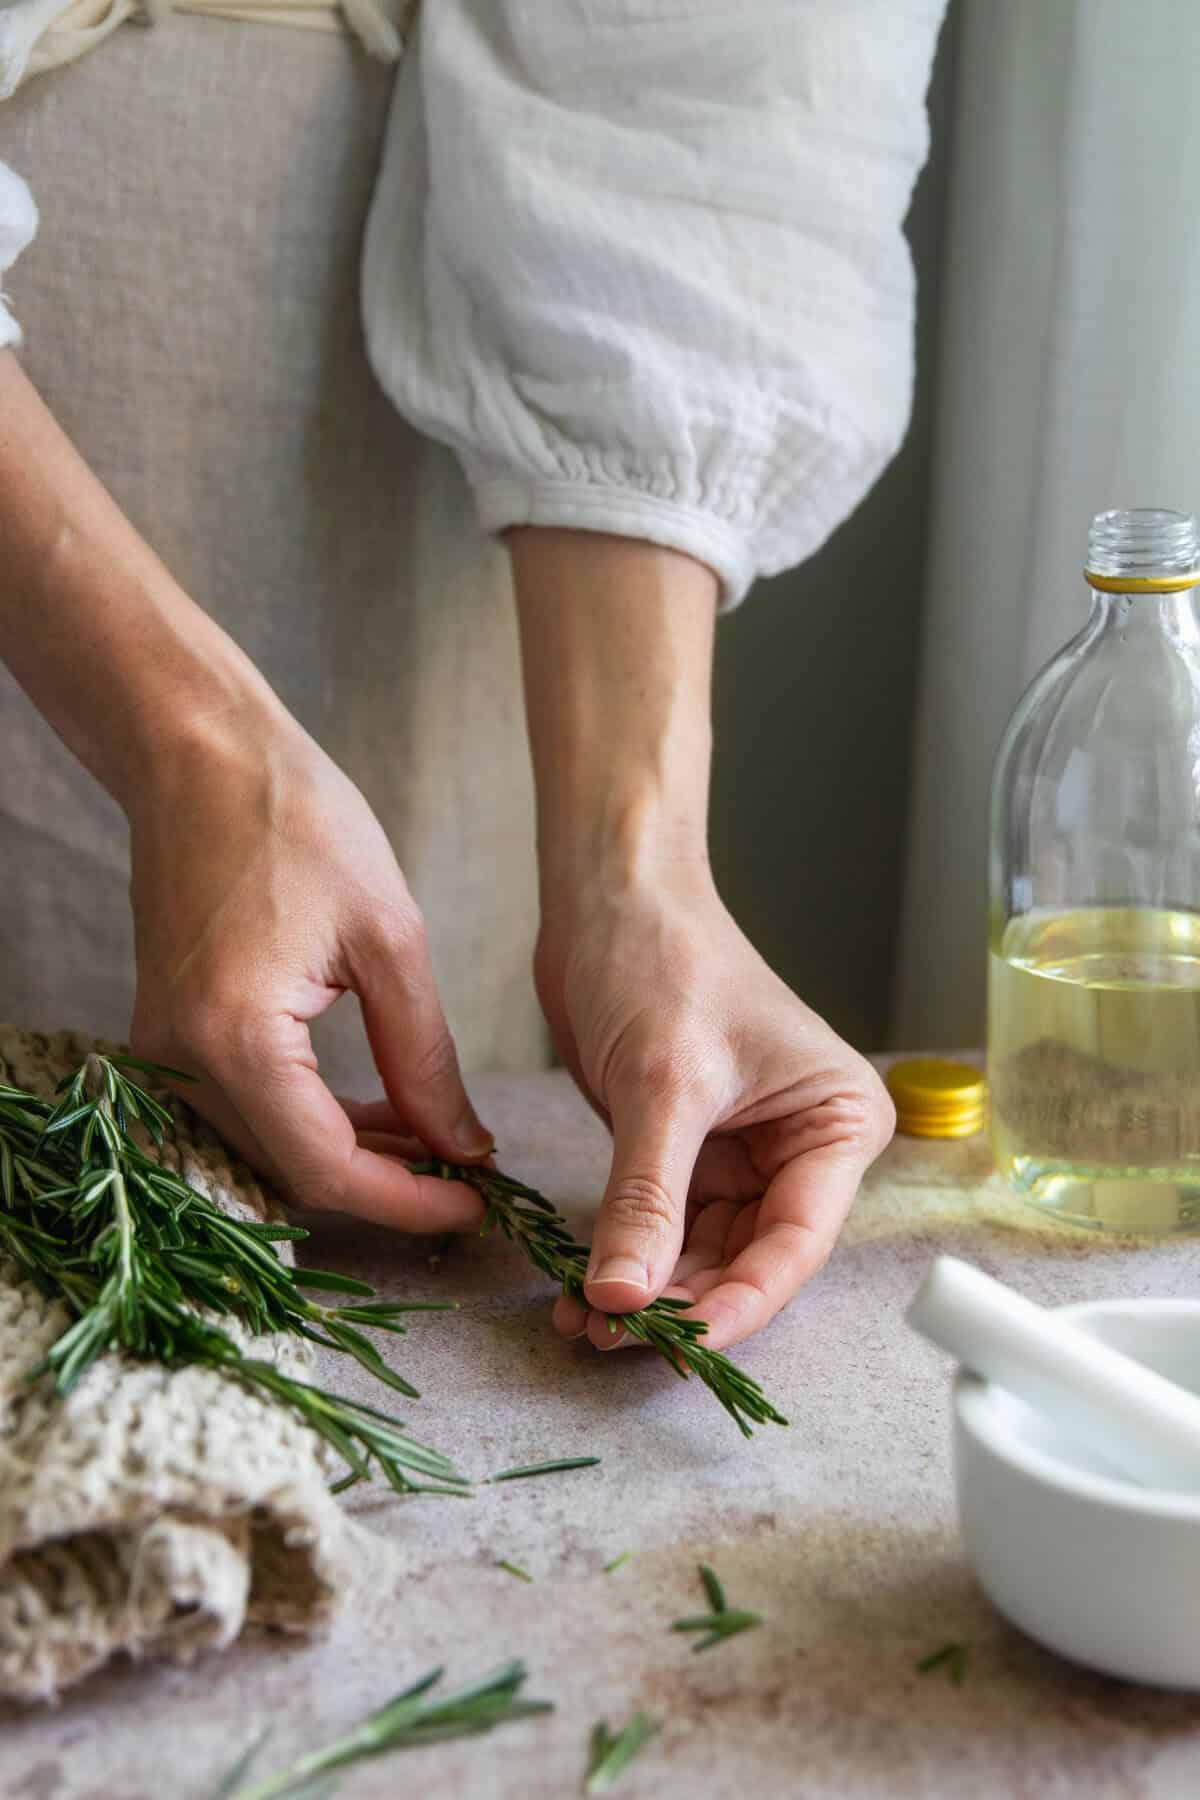 Crush rosemary before infusing into rosemary oil for hair